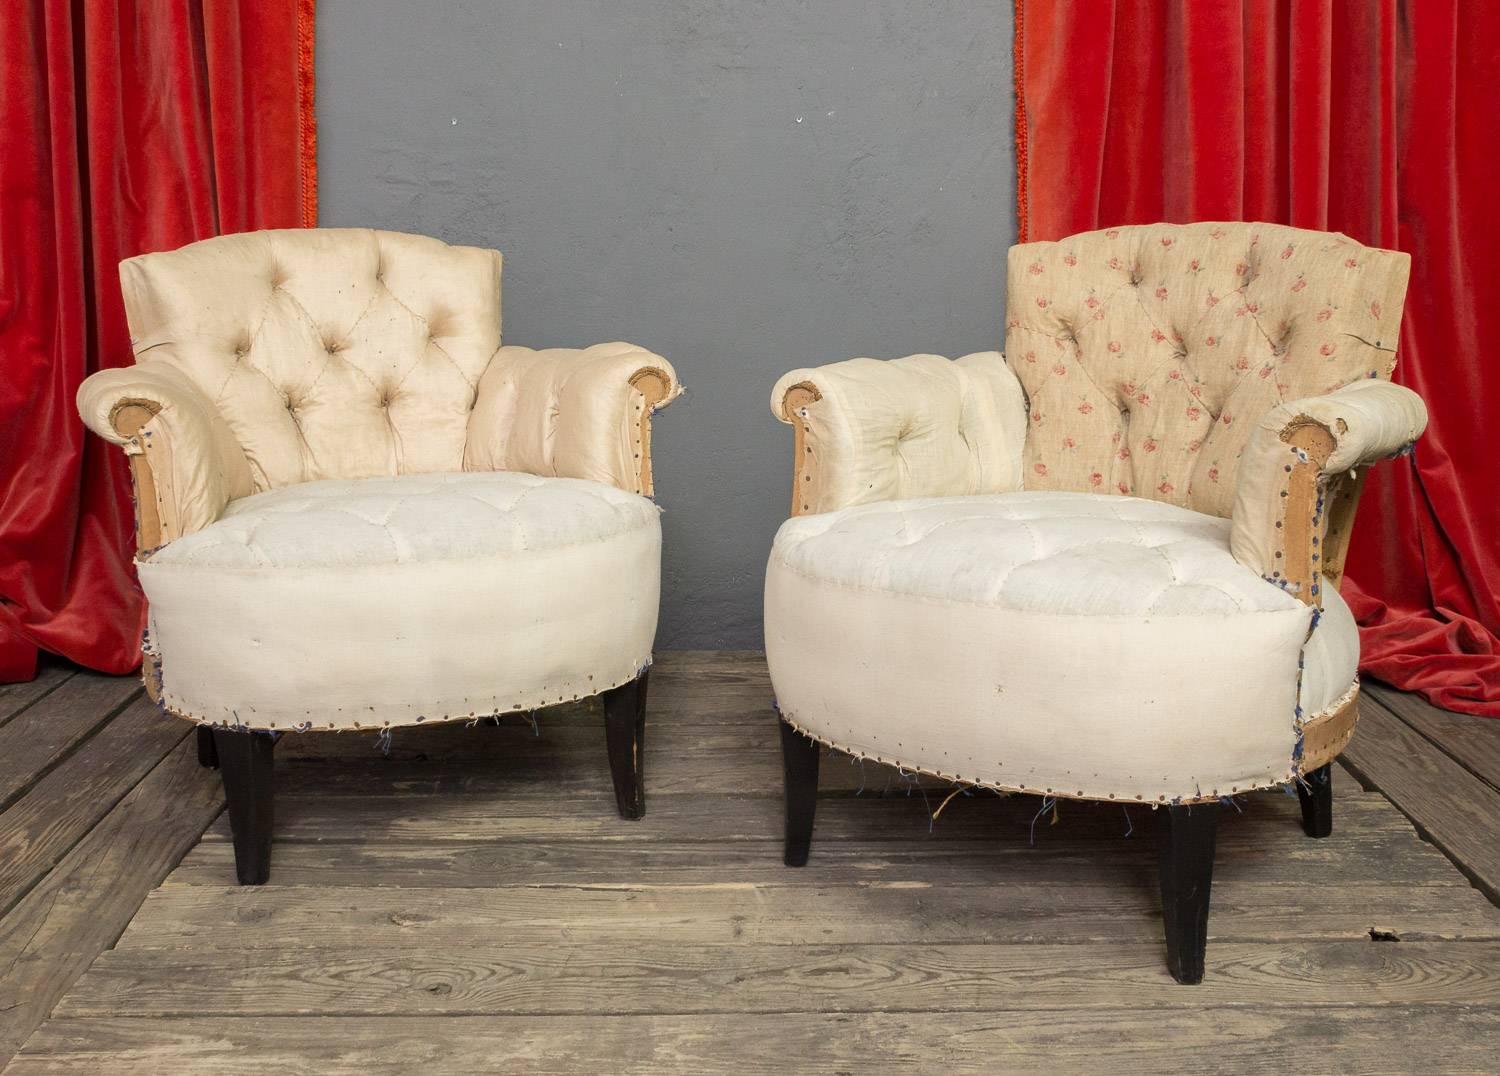 Pair of petite, 1930s tufted armchairs. Fabric has been stripped and the chairs are upholstery ready. 